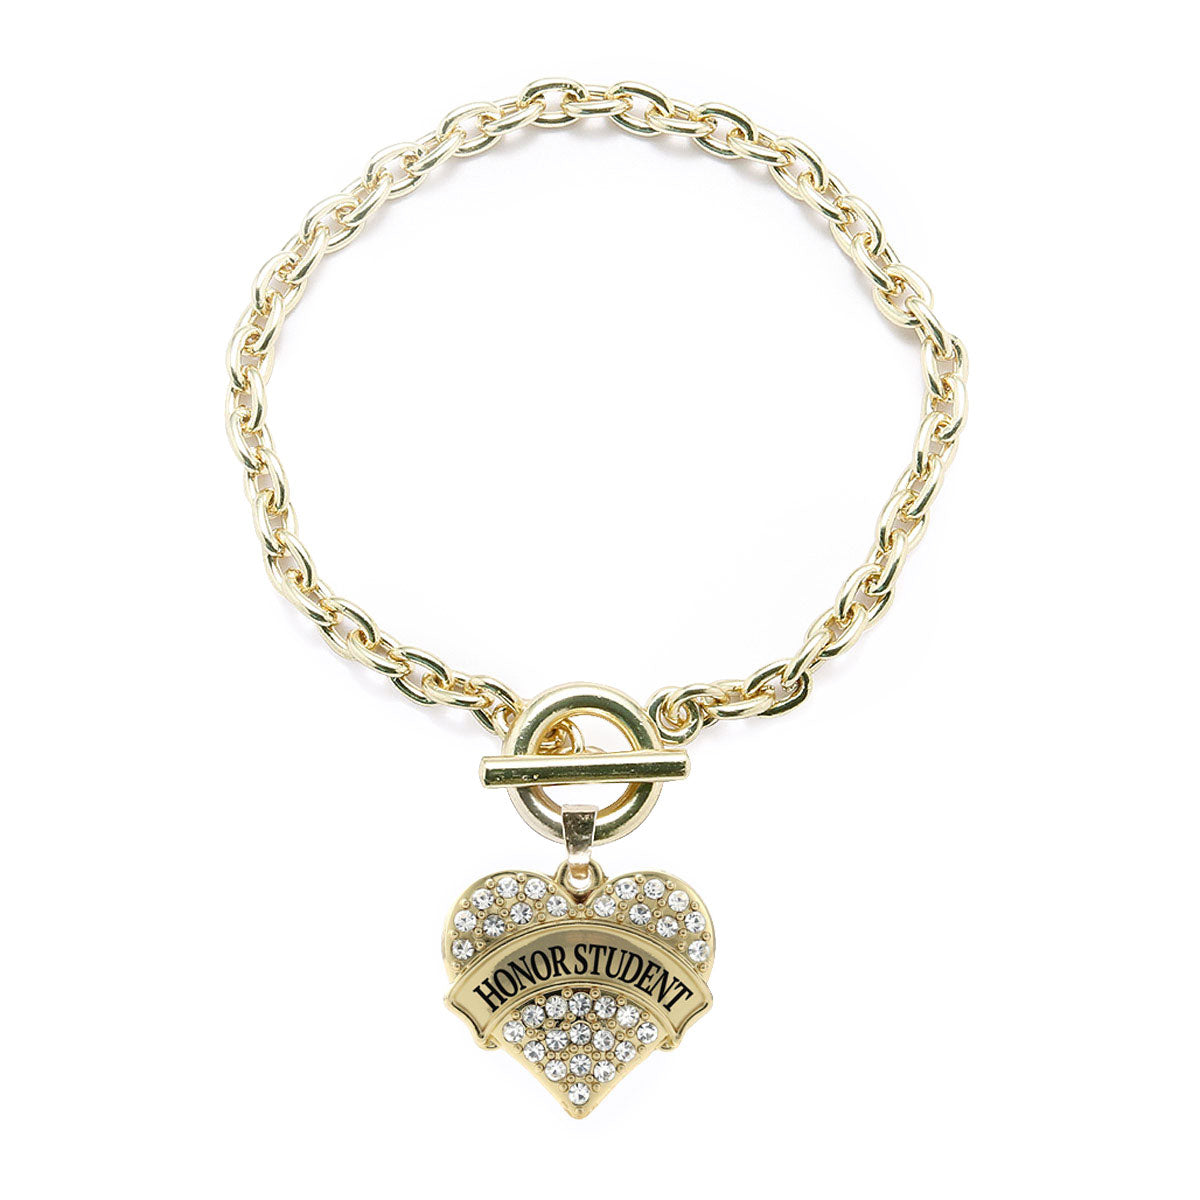 Gold Honor Student Pave Heart Charm Toggle Bracelet